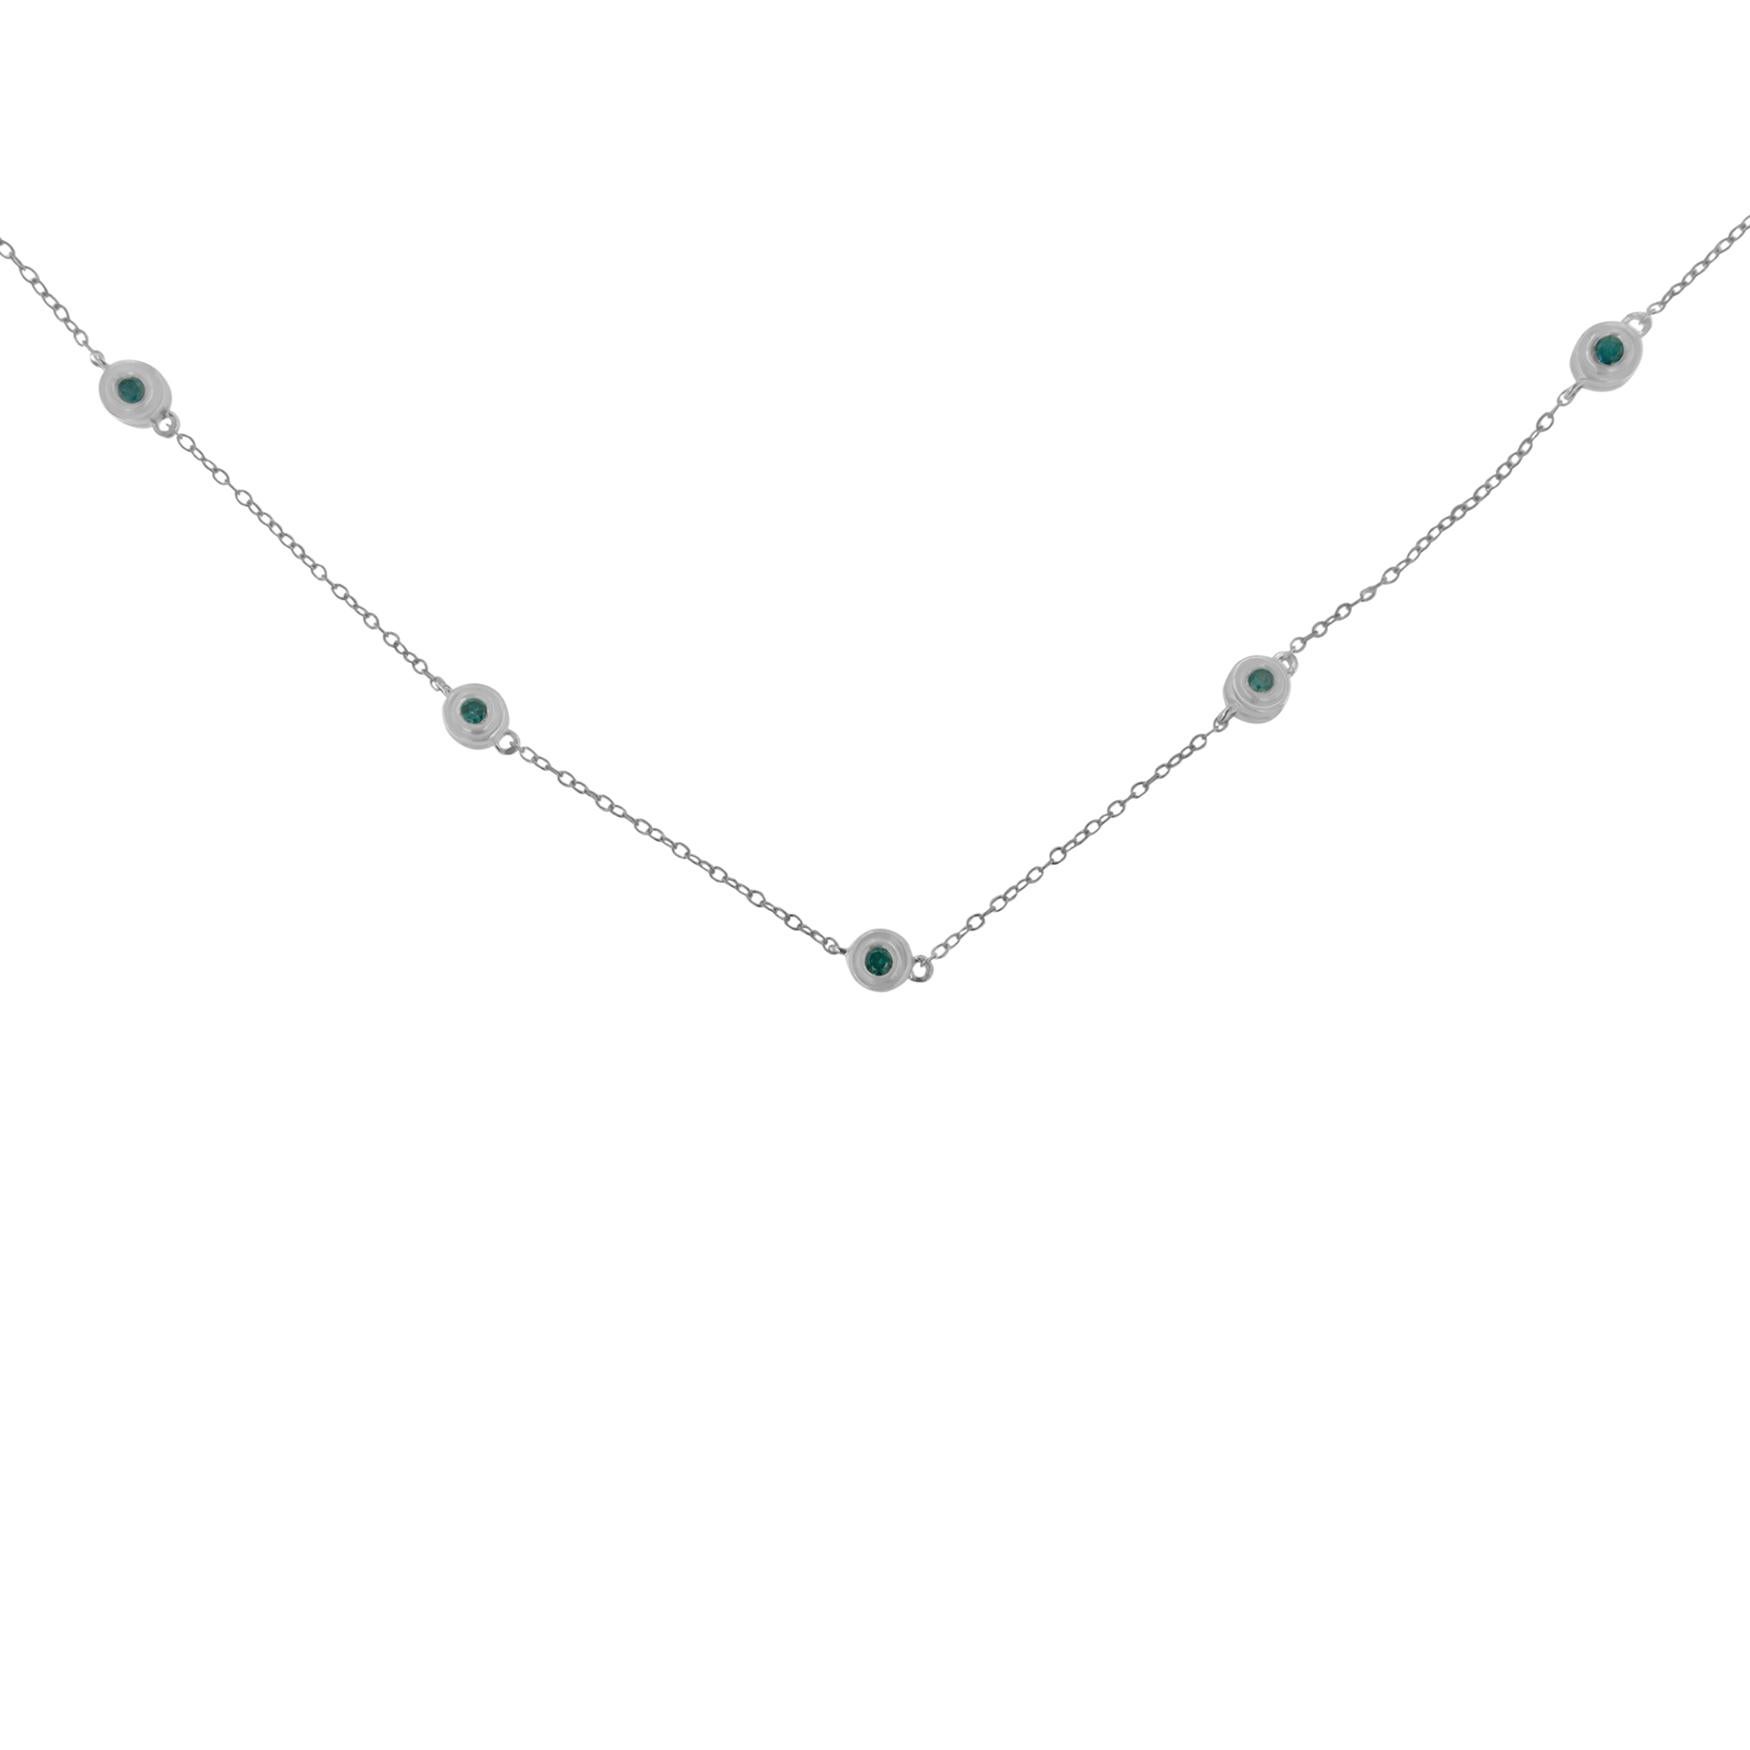 Add a touch of elegance to your outfit with this charming diamond yard necklace. Created in the finest 0.925 sterling silver, this piece is treated with 14 sparkling, round-cut diamonds in a bezel setting. The treated blue diamonds add a bit of